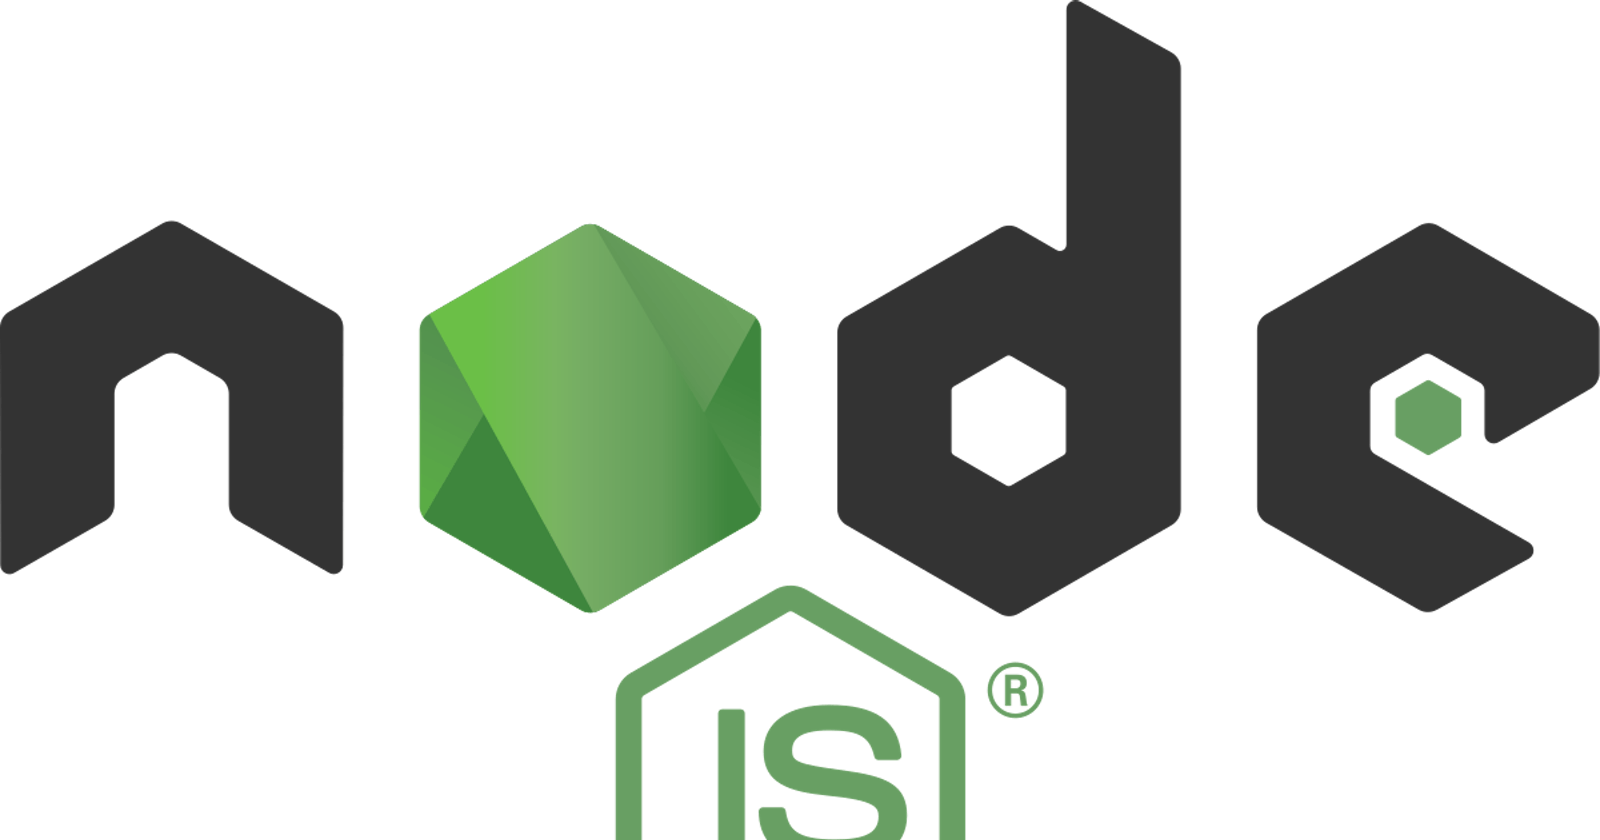 Scaling up Nodejs APIs (What I learnt so far)